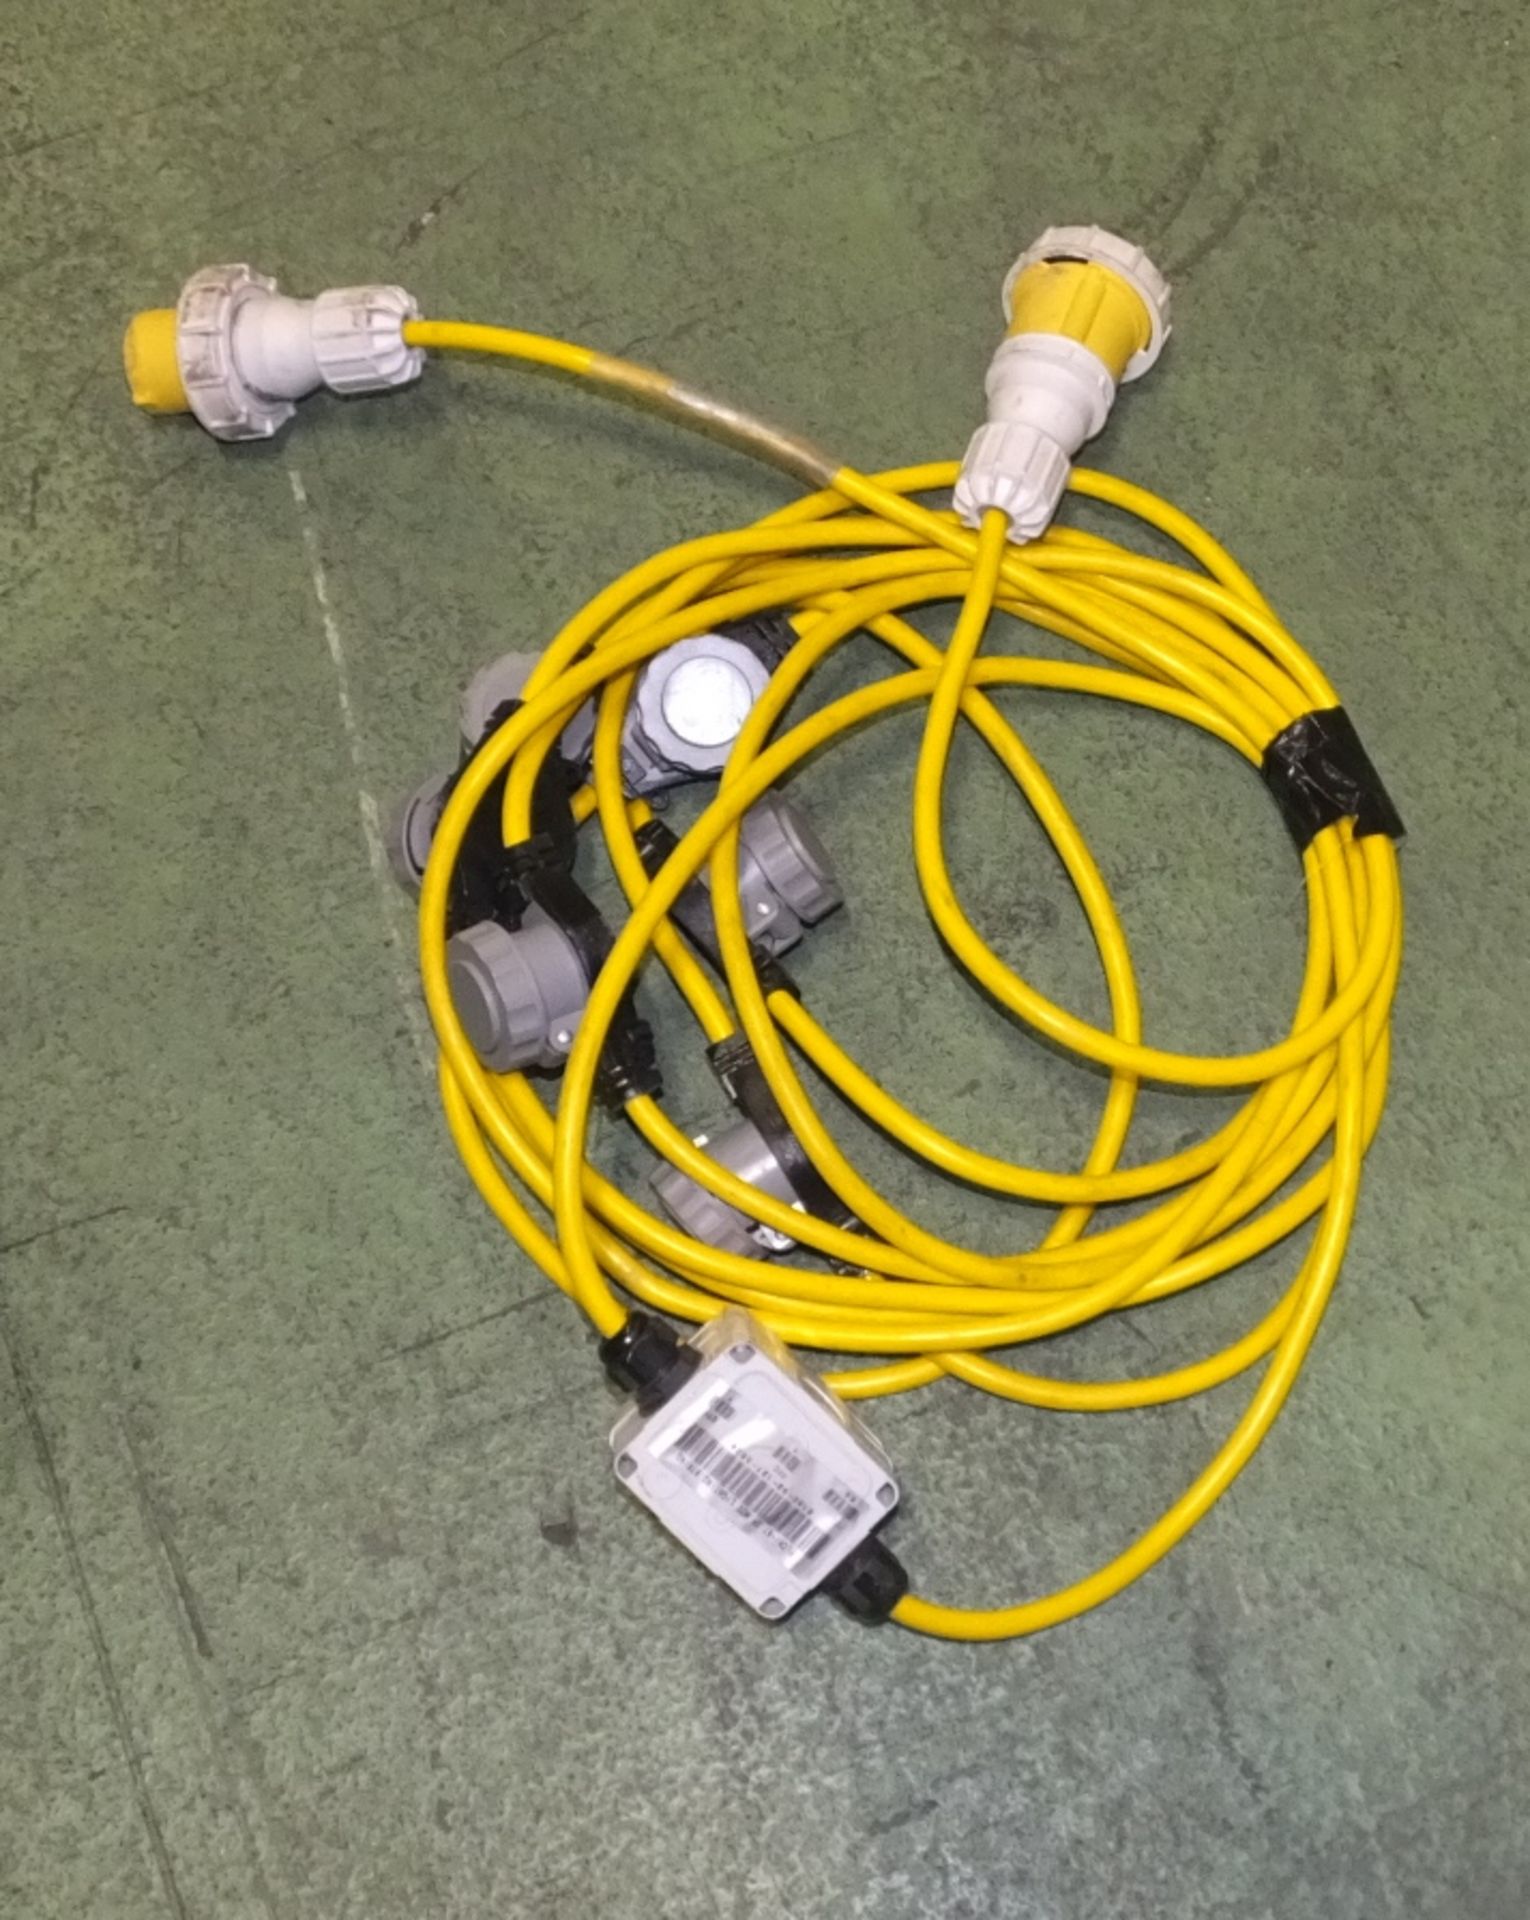 25x Festoon String Cable Lighting assembly - Image 2 of 2